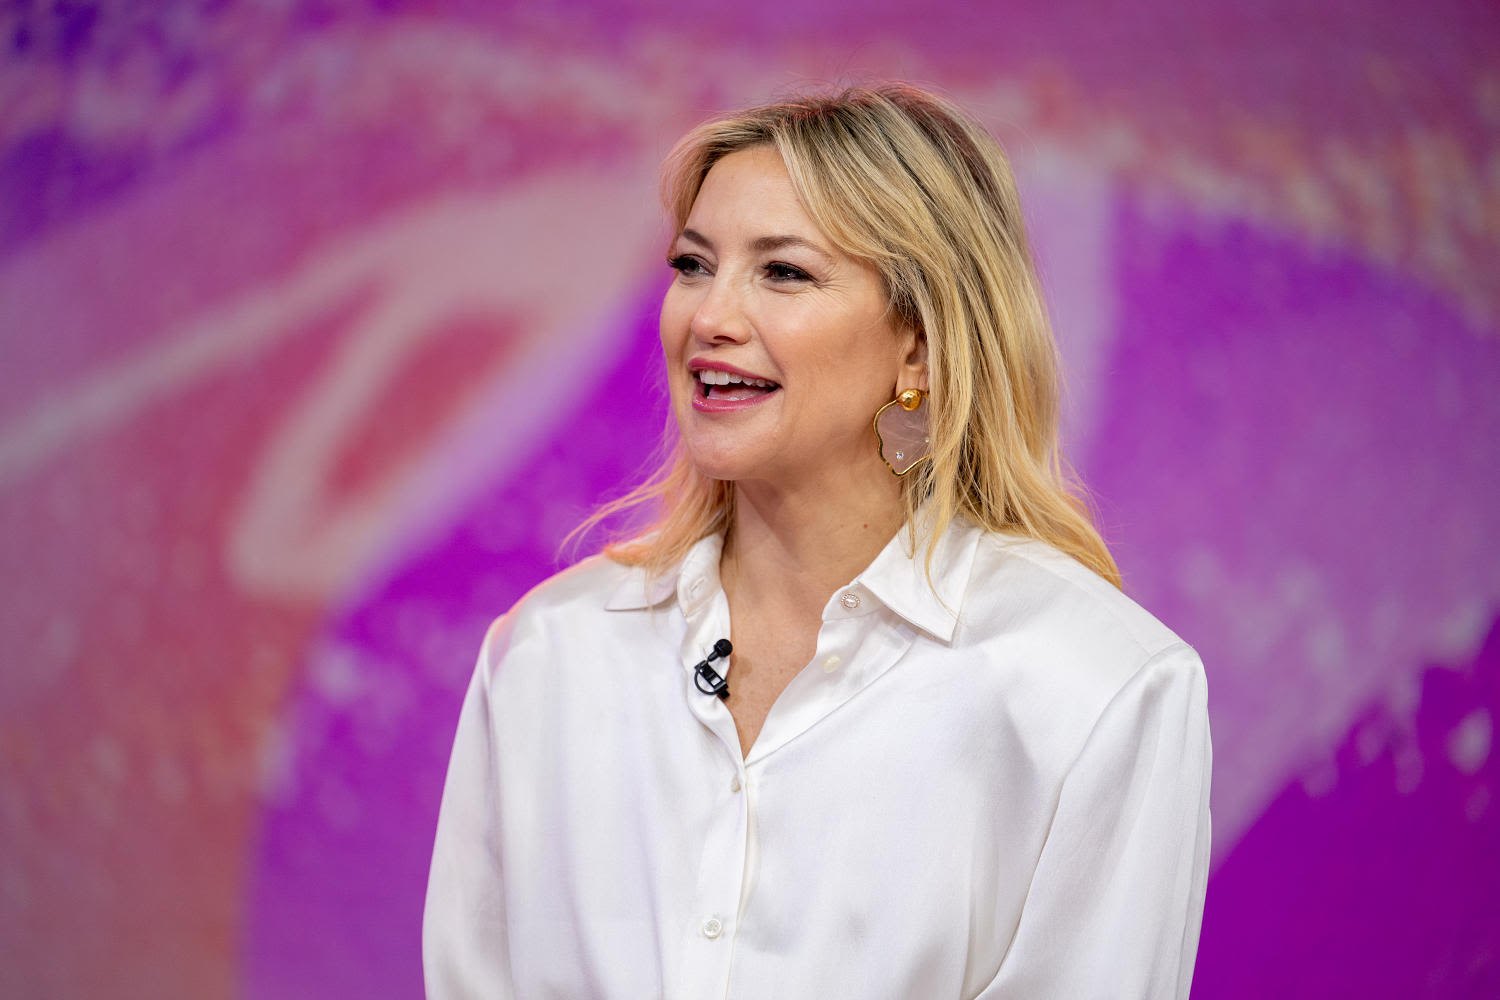 Kate Hudson's debut album: What to know about 'Glorious'